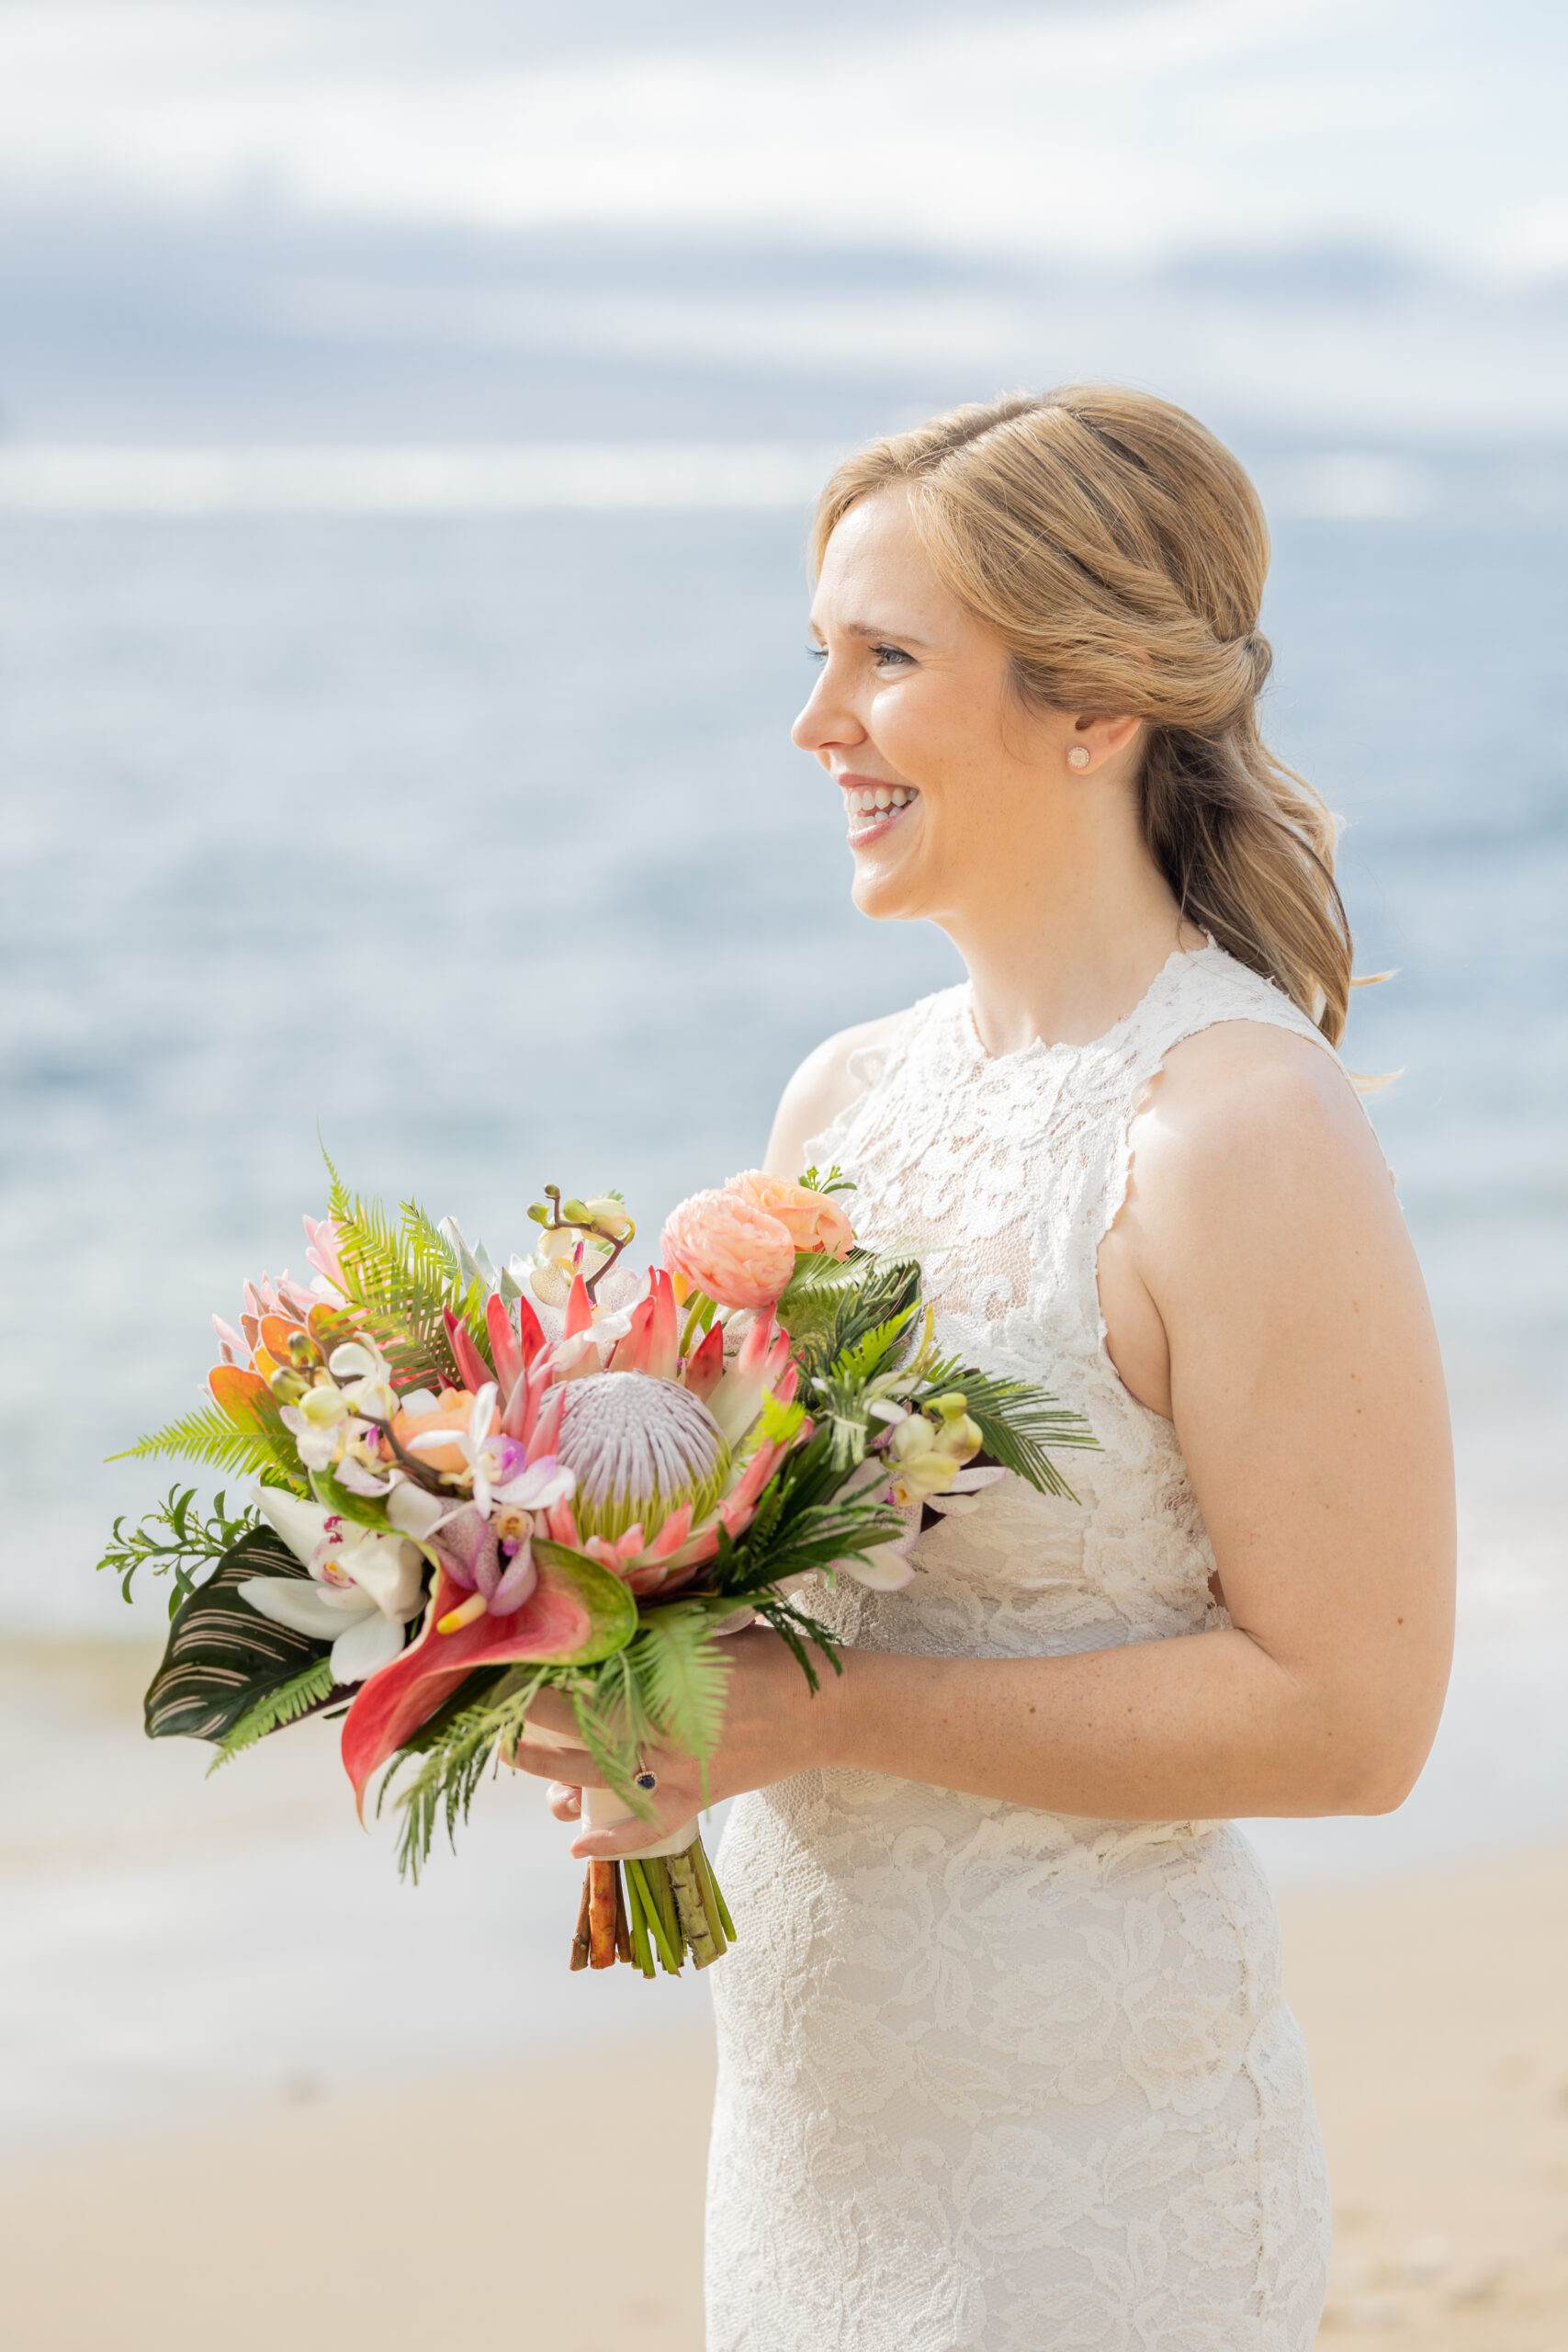 A bride sees her bride for the first time. They are getting married on the beach in front of the ocean.